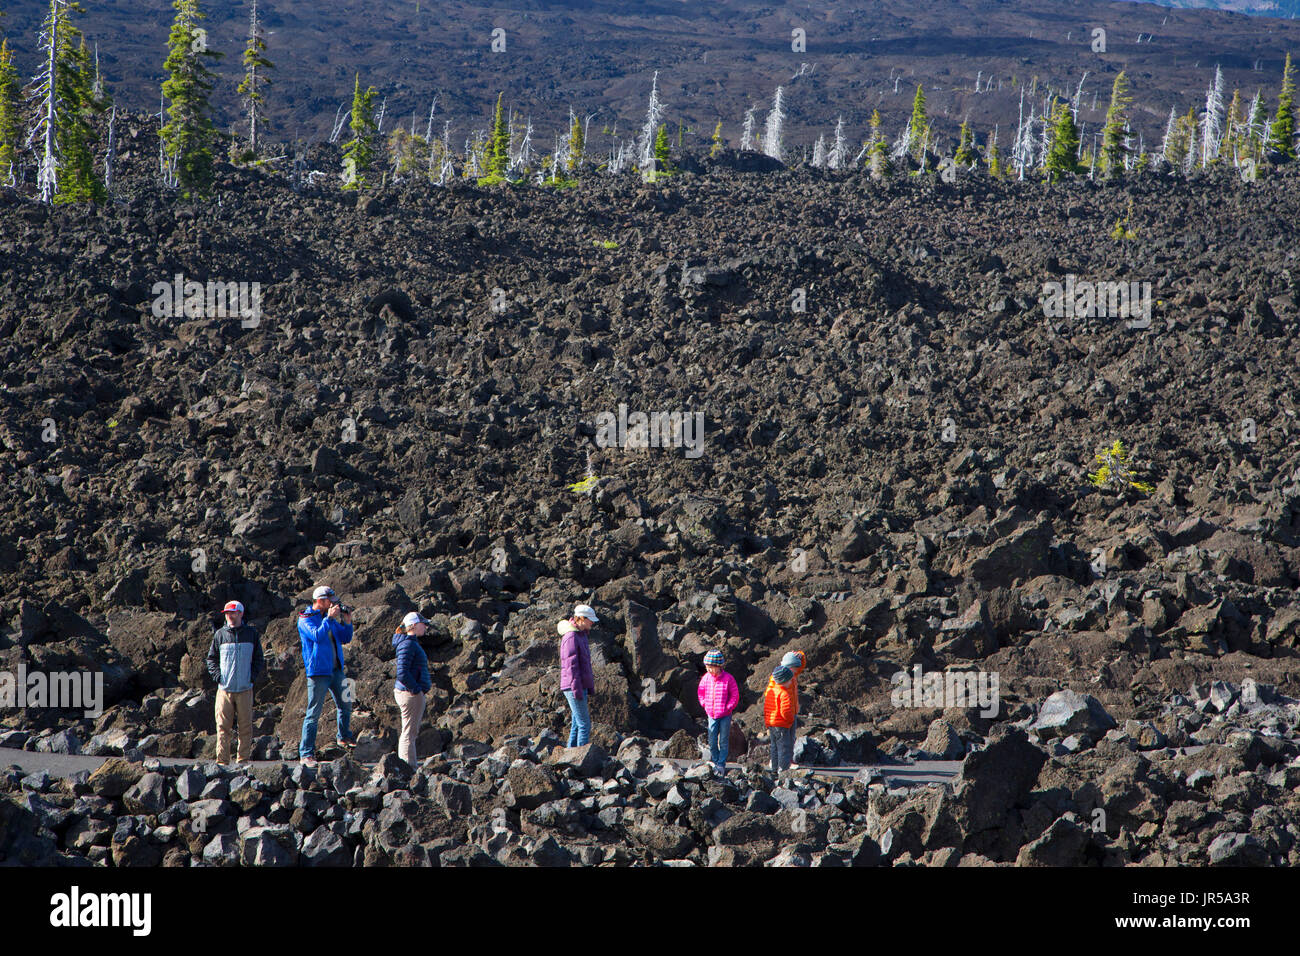 Hikers on Lava River National Recreation Trail, McKenzie Pass-Santiam Pass National Scenic Byway, Willamette National Forest, Oregon Stock Photo